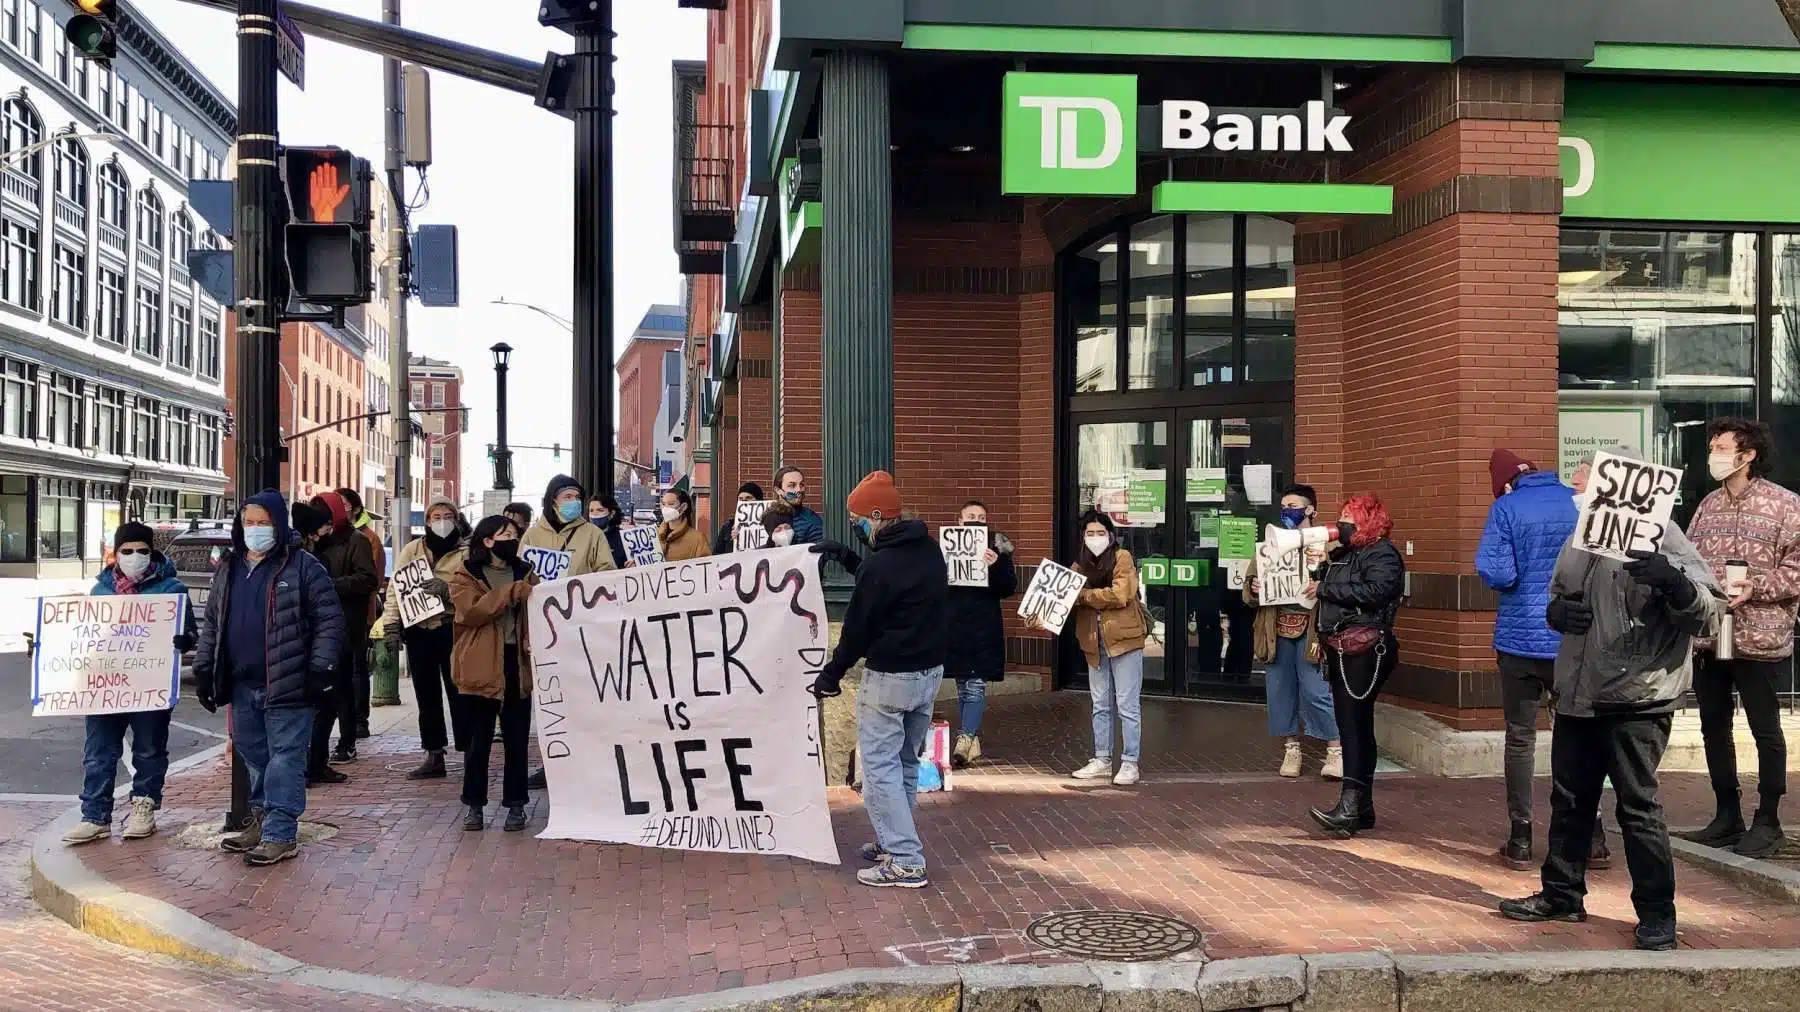 Protesters target TD Bank in Providence for continued oil pipeline investment